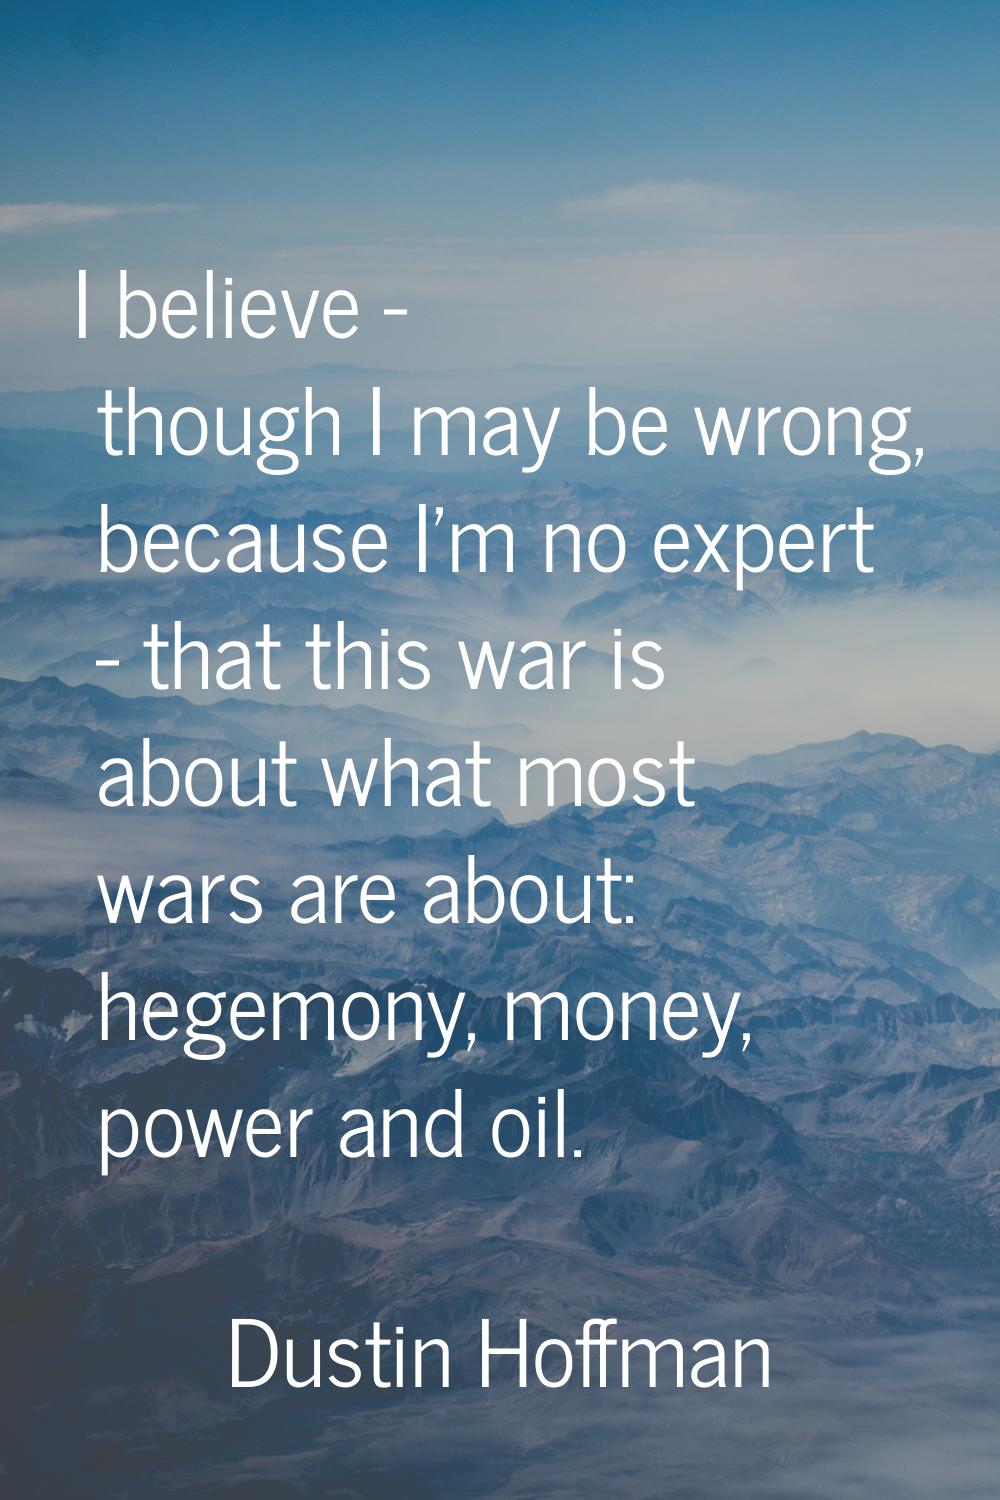 I believe - though I may be wrong, because I'm no expert - that this war is about what most wars ar